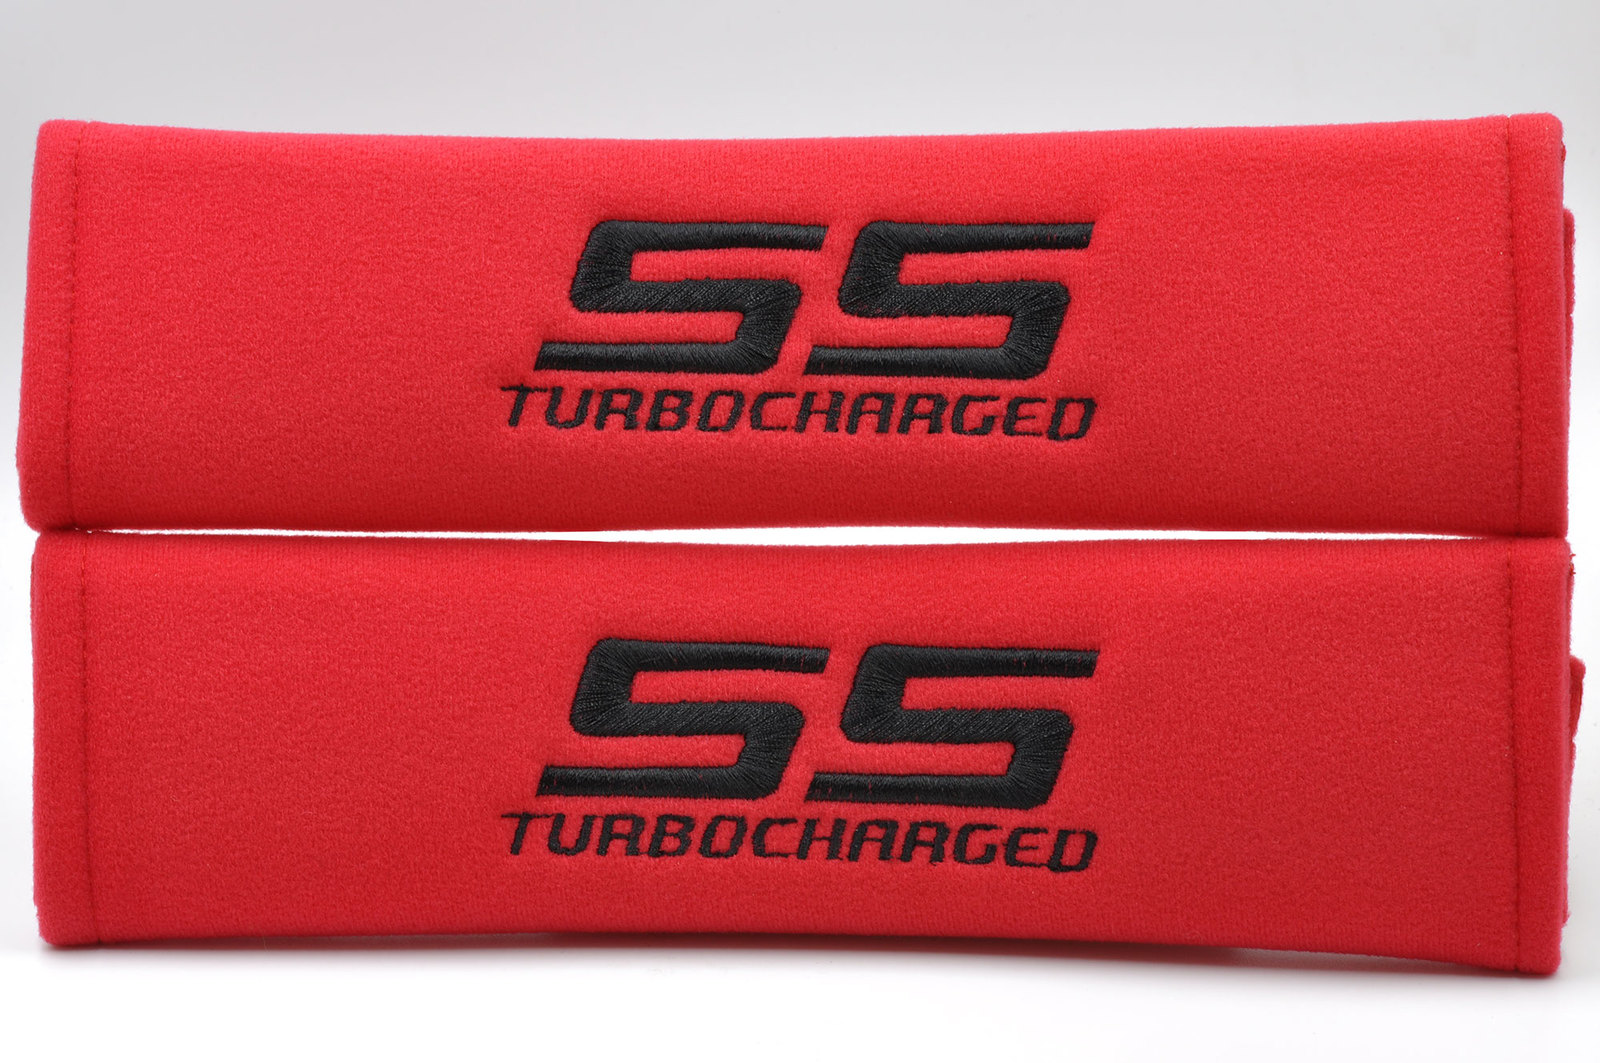 Primary image for 2 pieces (1 PAIR) Chevy SS Turbocharged Embroidery Seat Belt Cover Pads (Red)